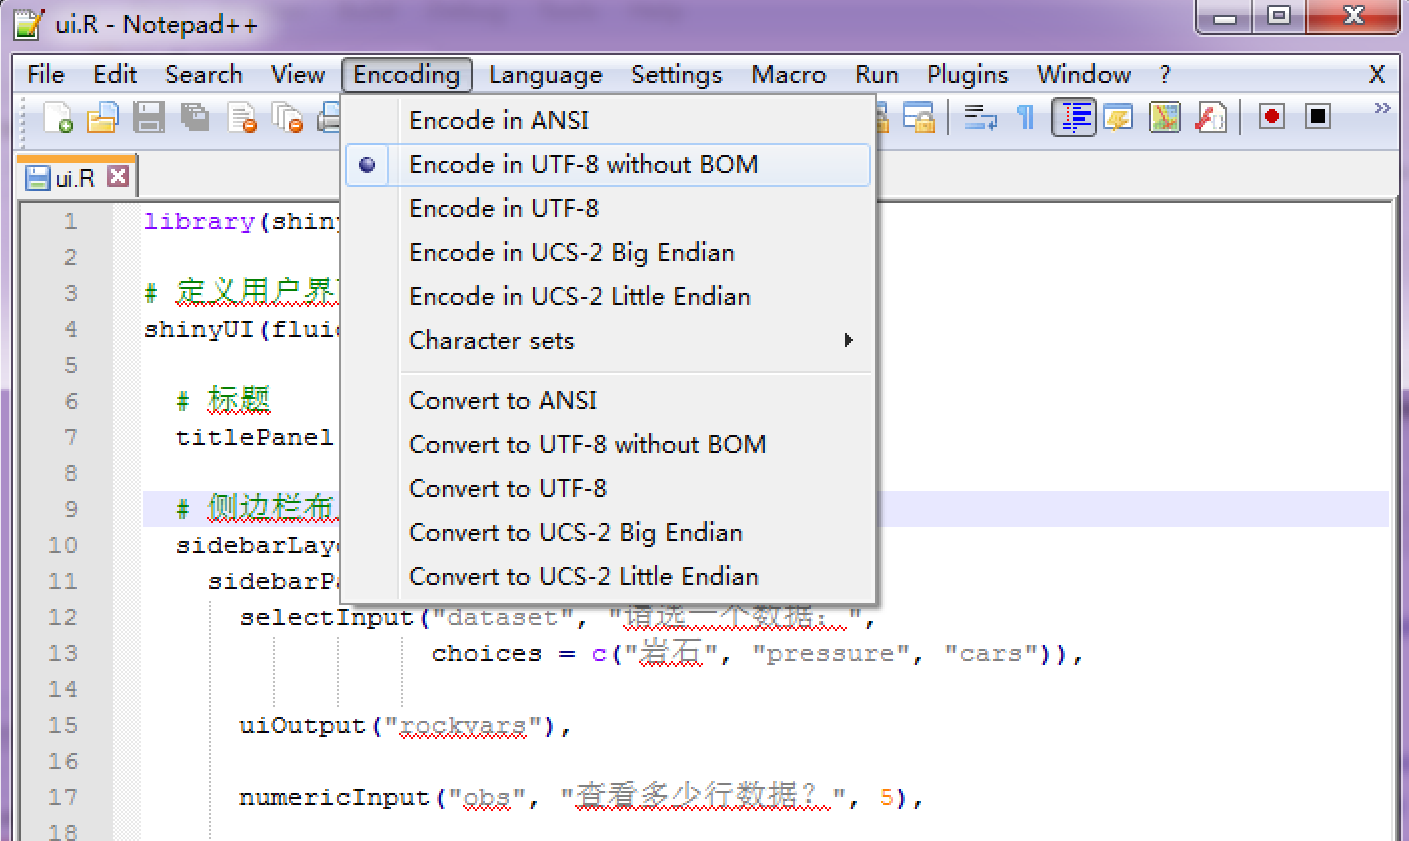 Selecting Encode in UTF-8 without BOM